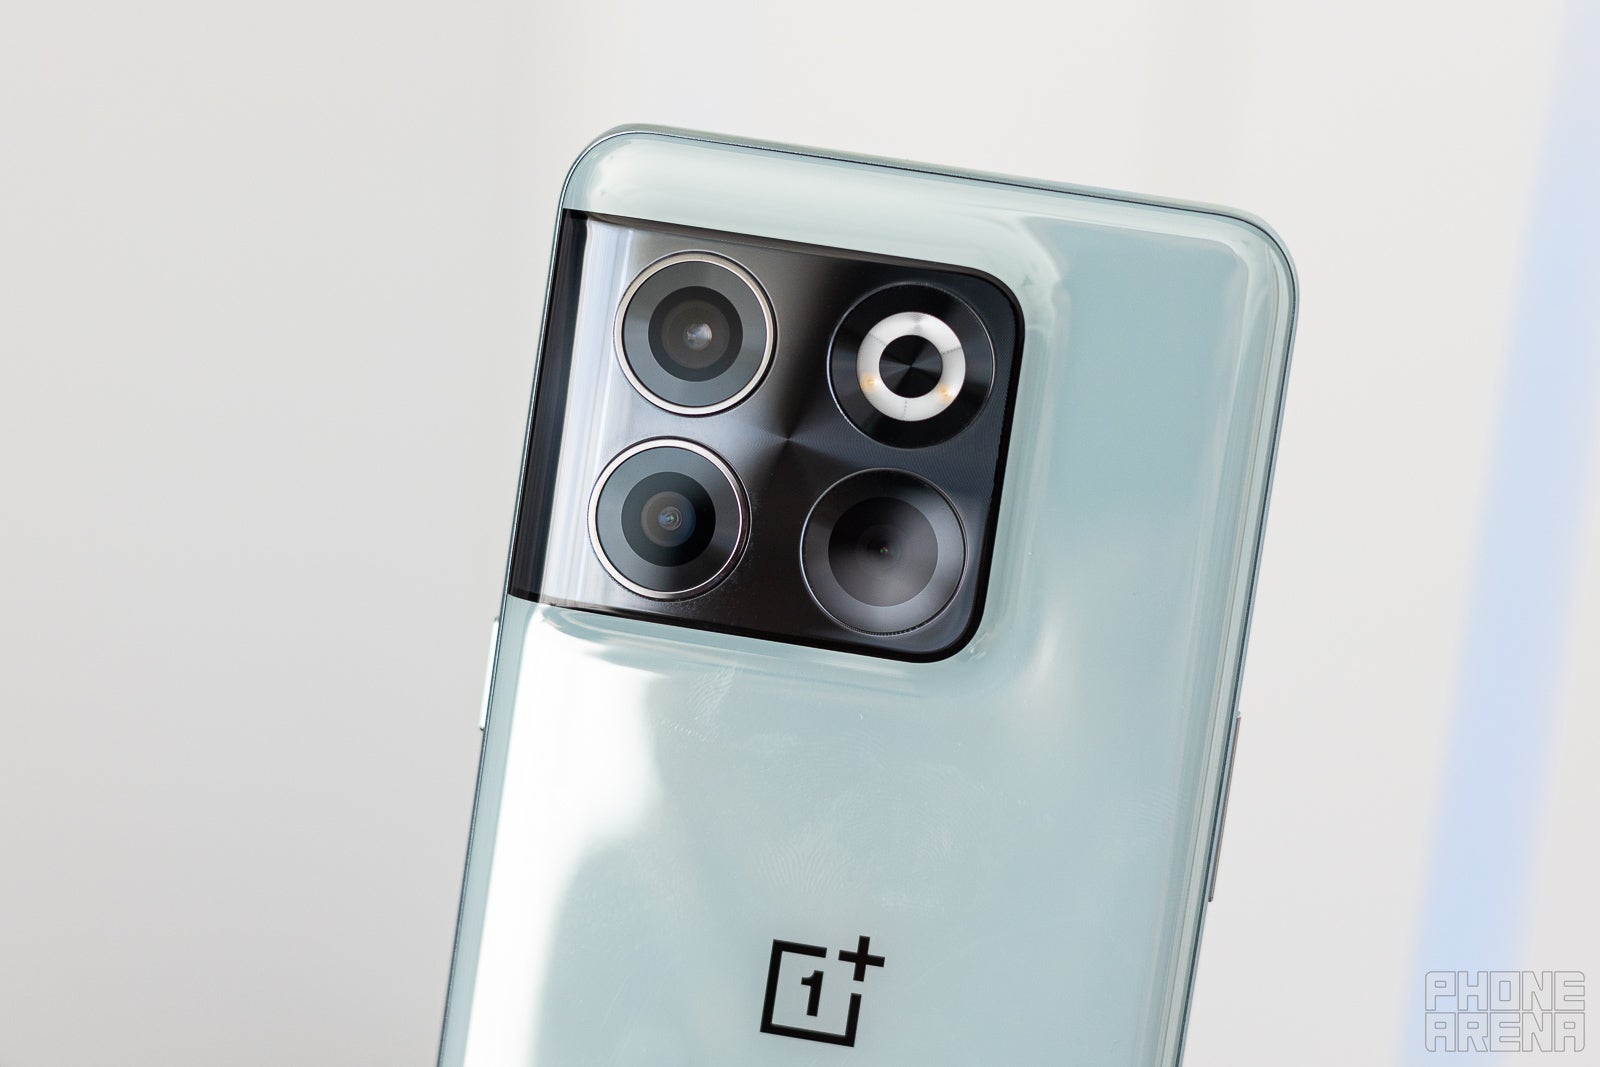 While camera performance isn’t flagship-grade on the 10T, it's definitely solid. - The OnePlus 10T gets discounted by more than $200 for the Holidays